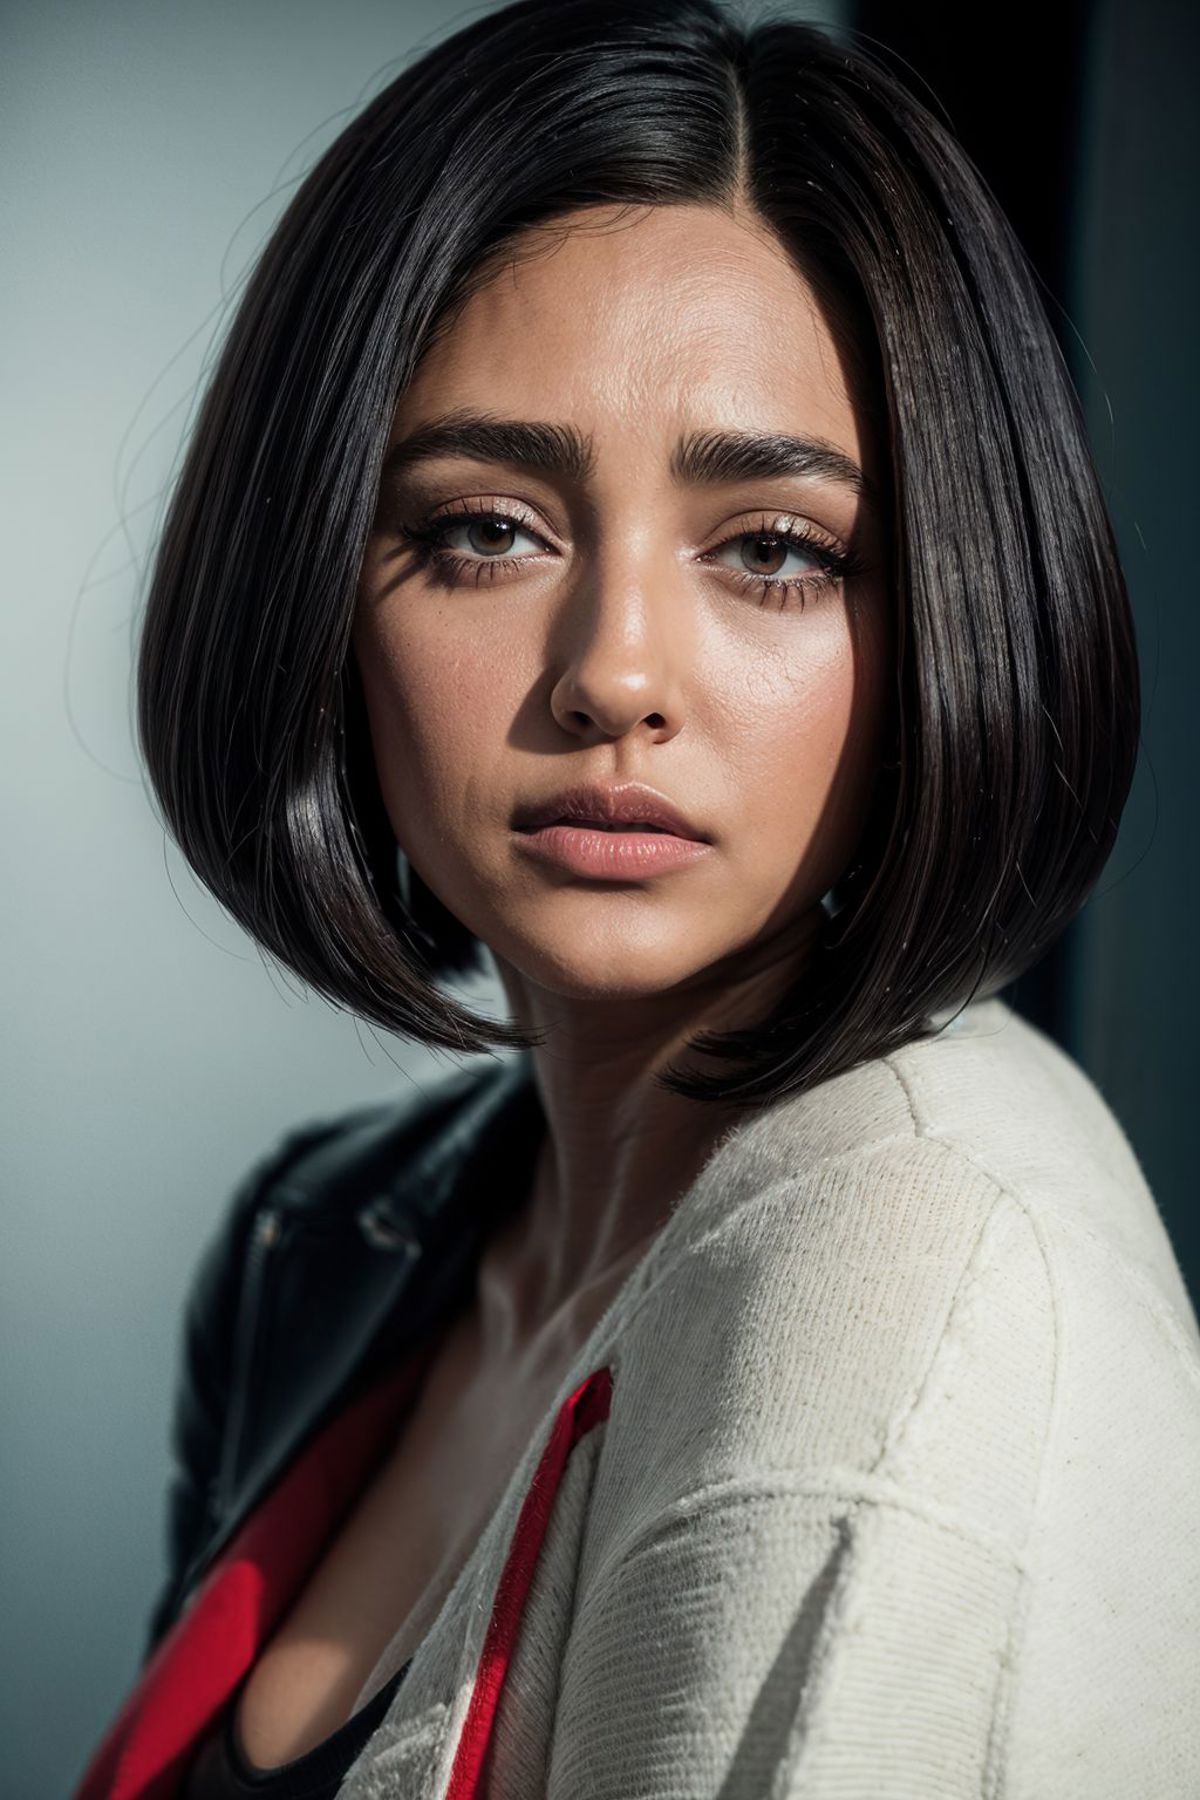 Golshifteh Farahani | Nik from Extraction image by PickleRick_1856